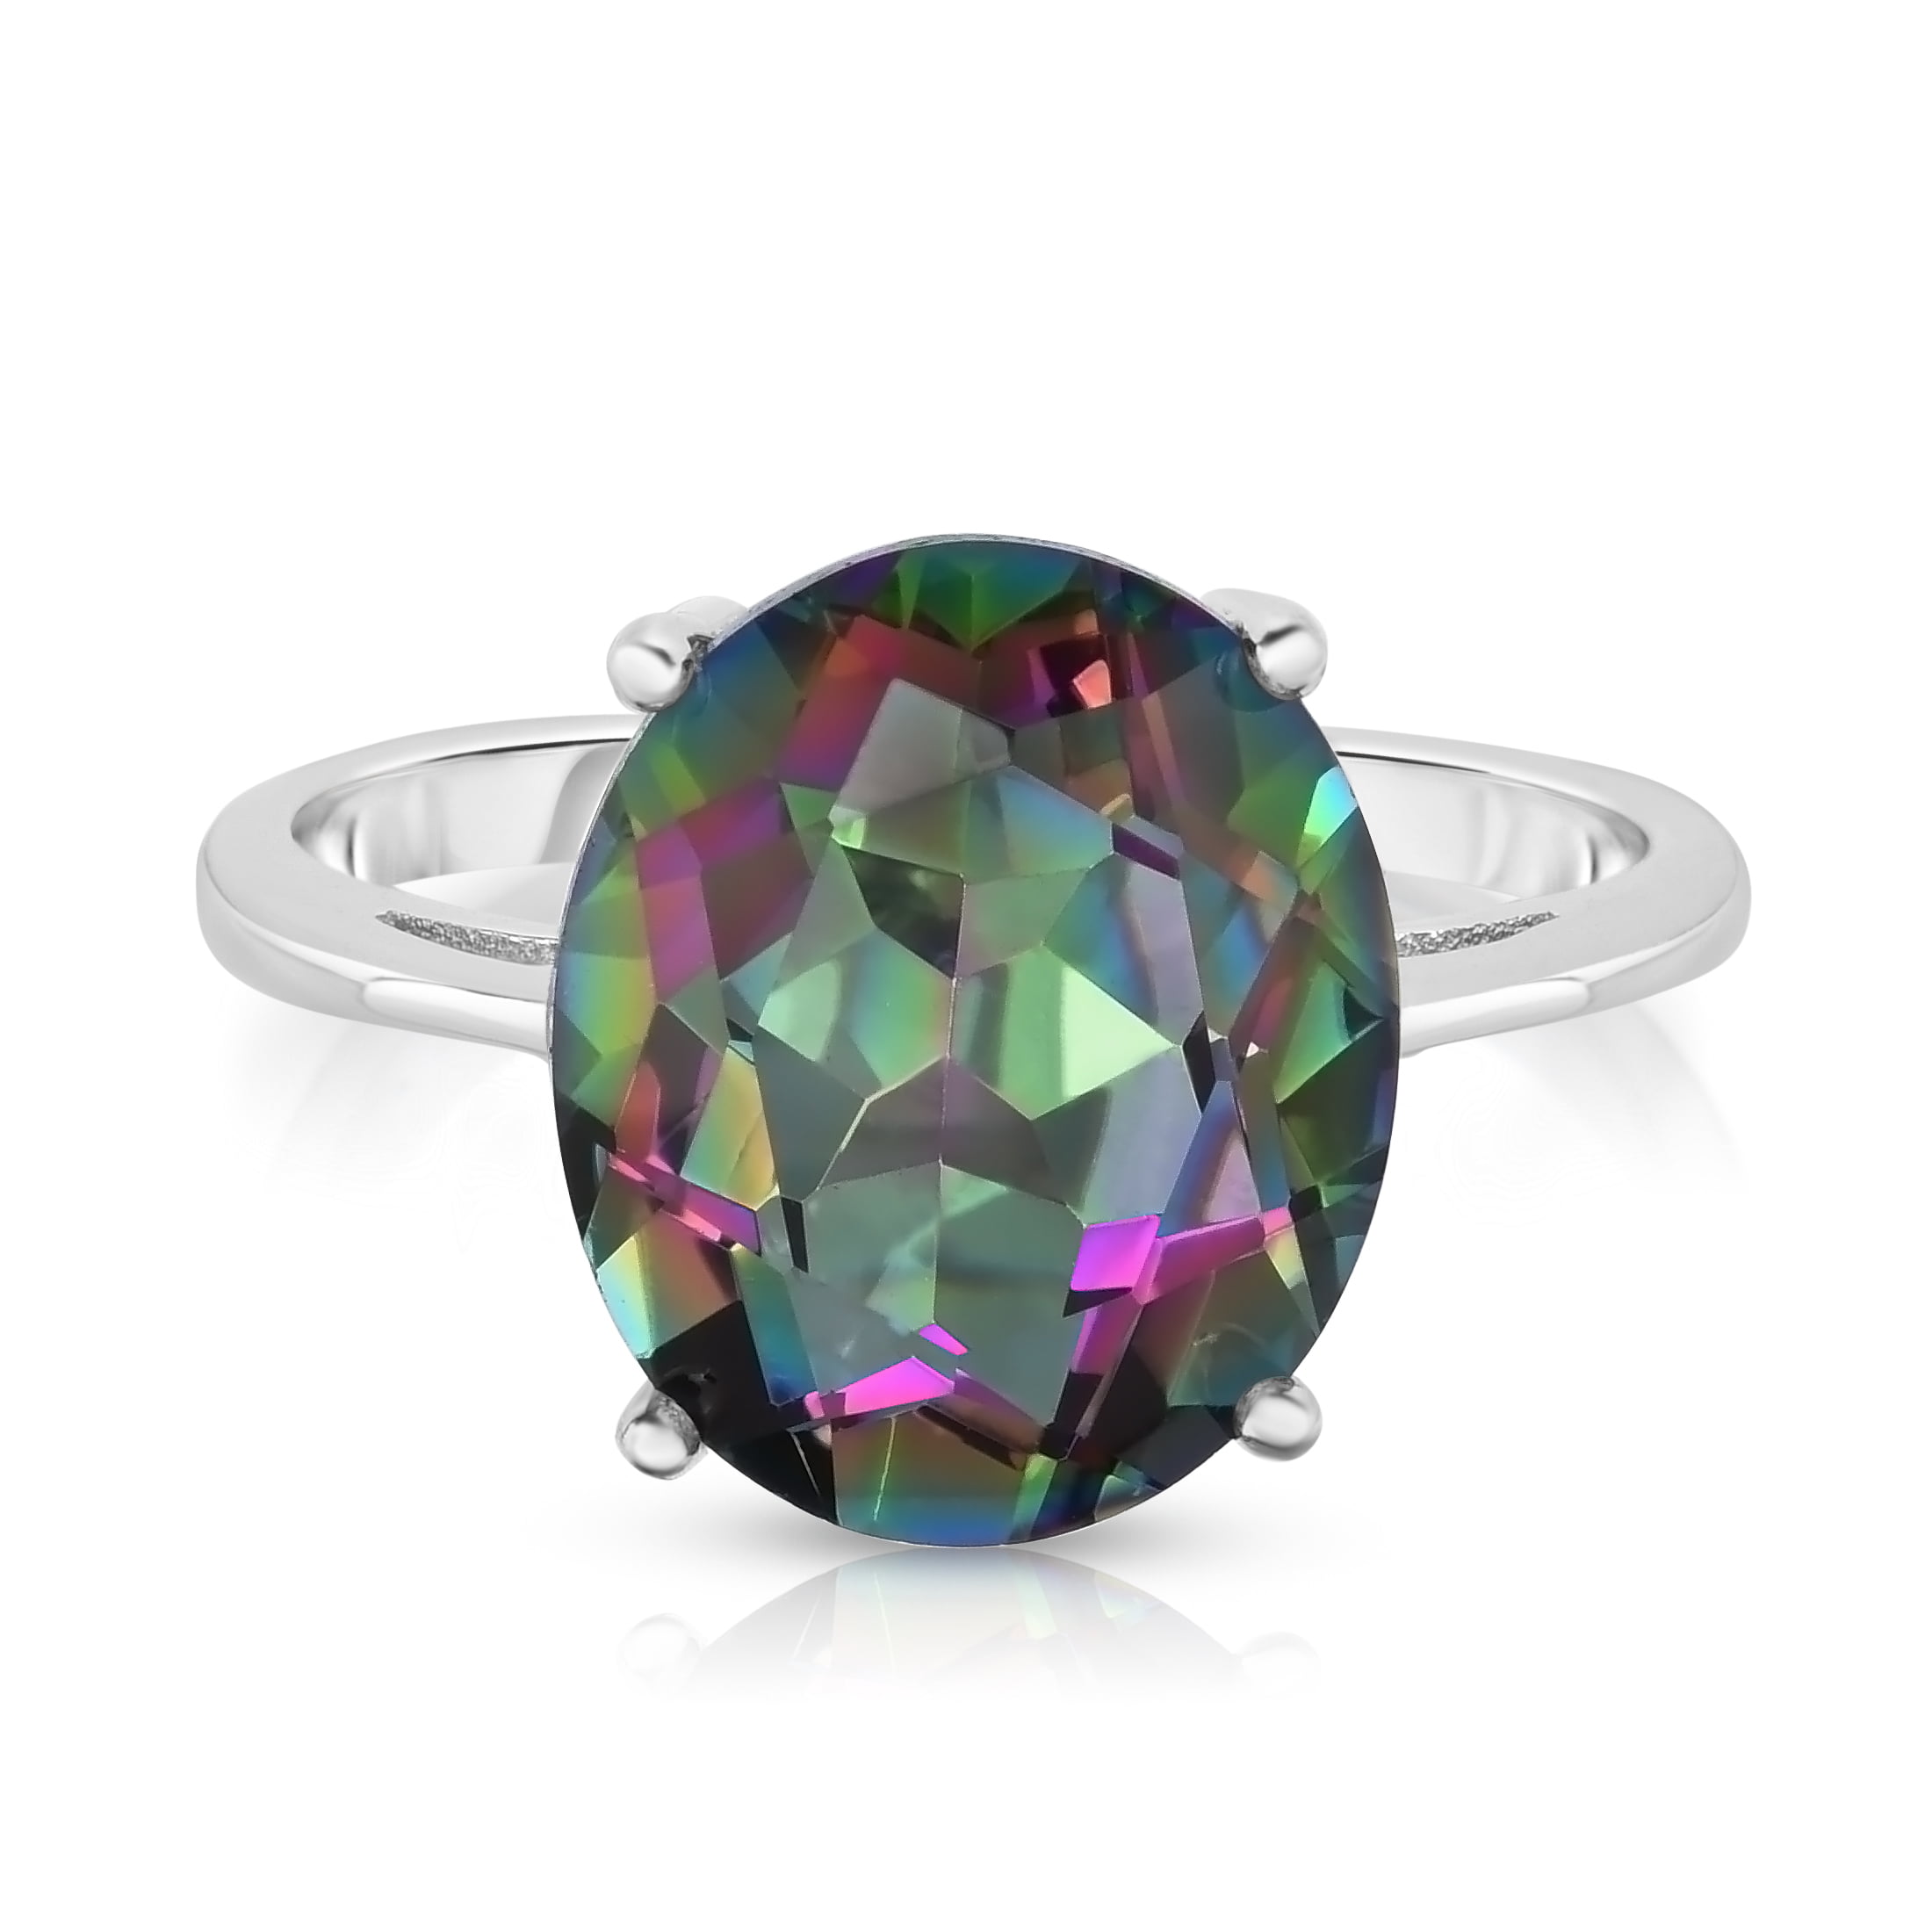 5.00 CTTW Genuine Mystic Topaz Oval Cut 925 Sterling Silver Ring Sizes 6-9 